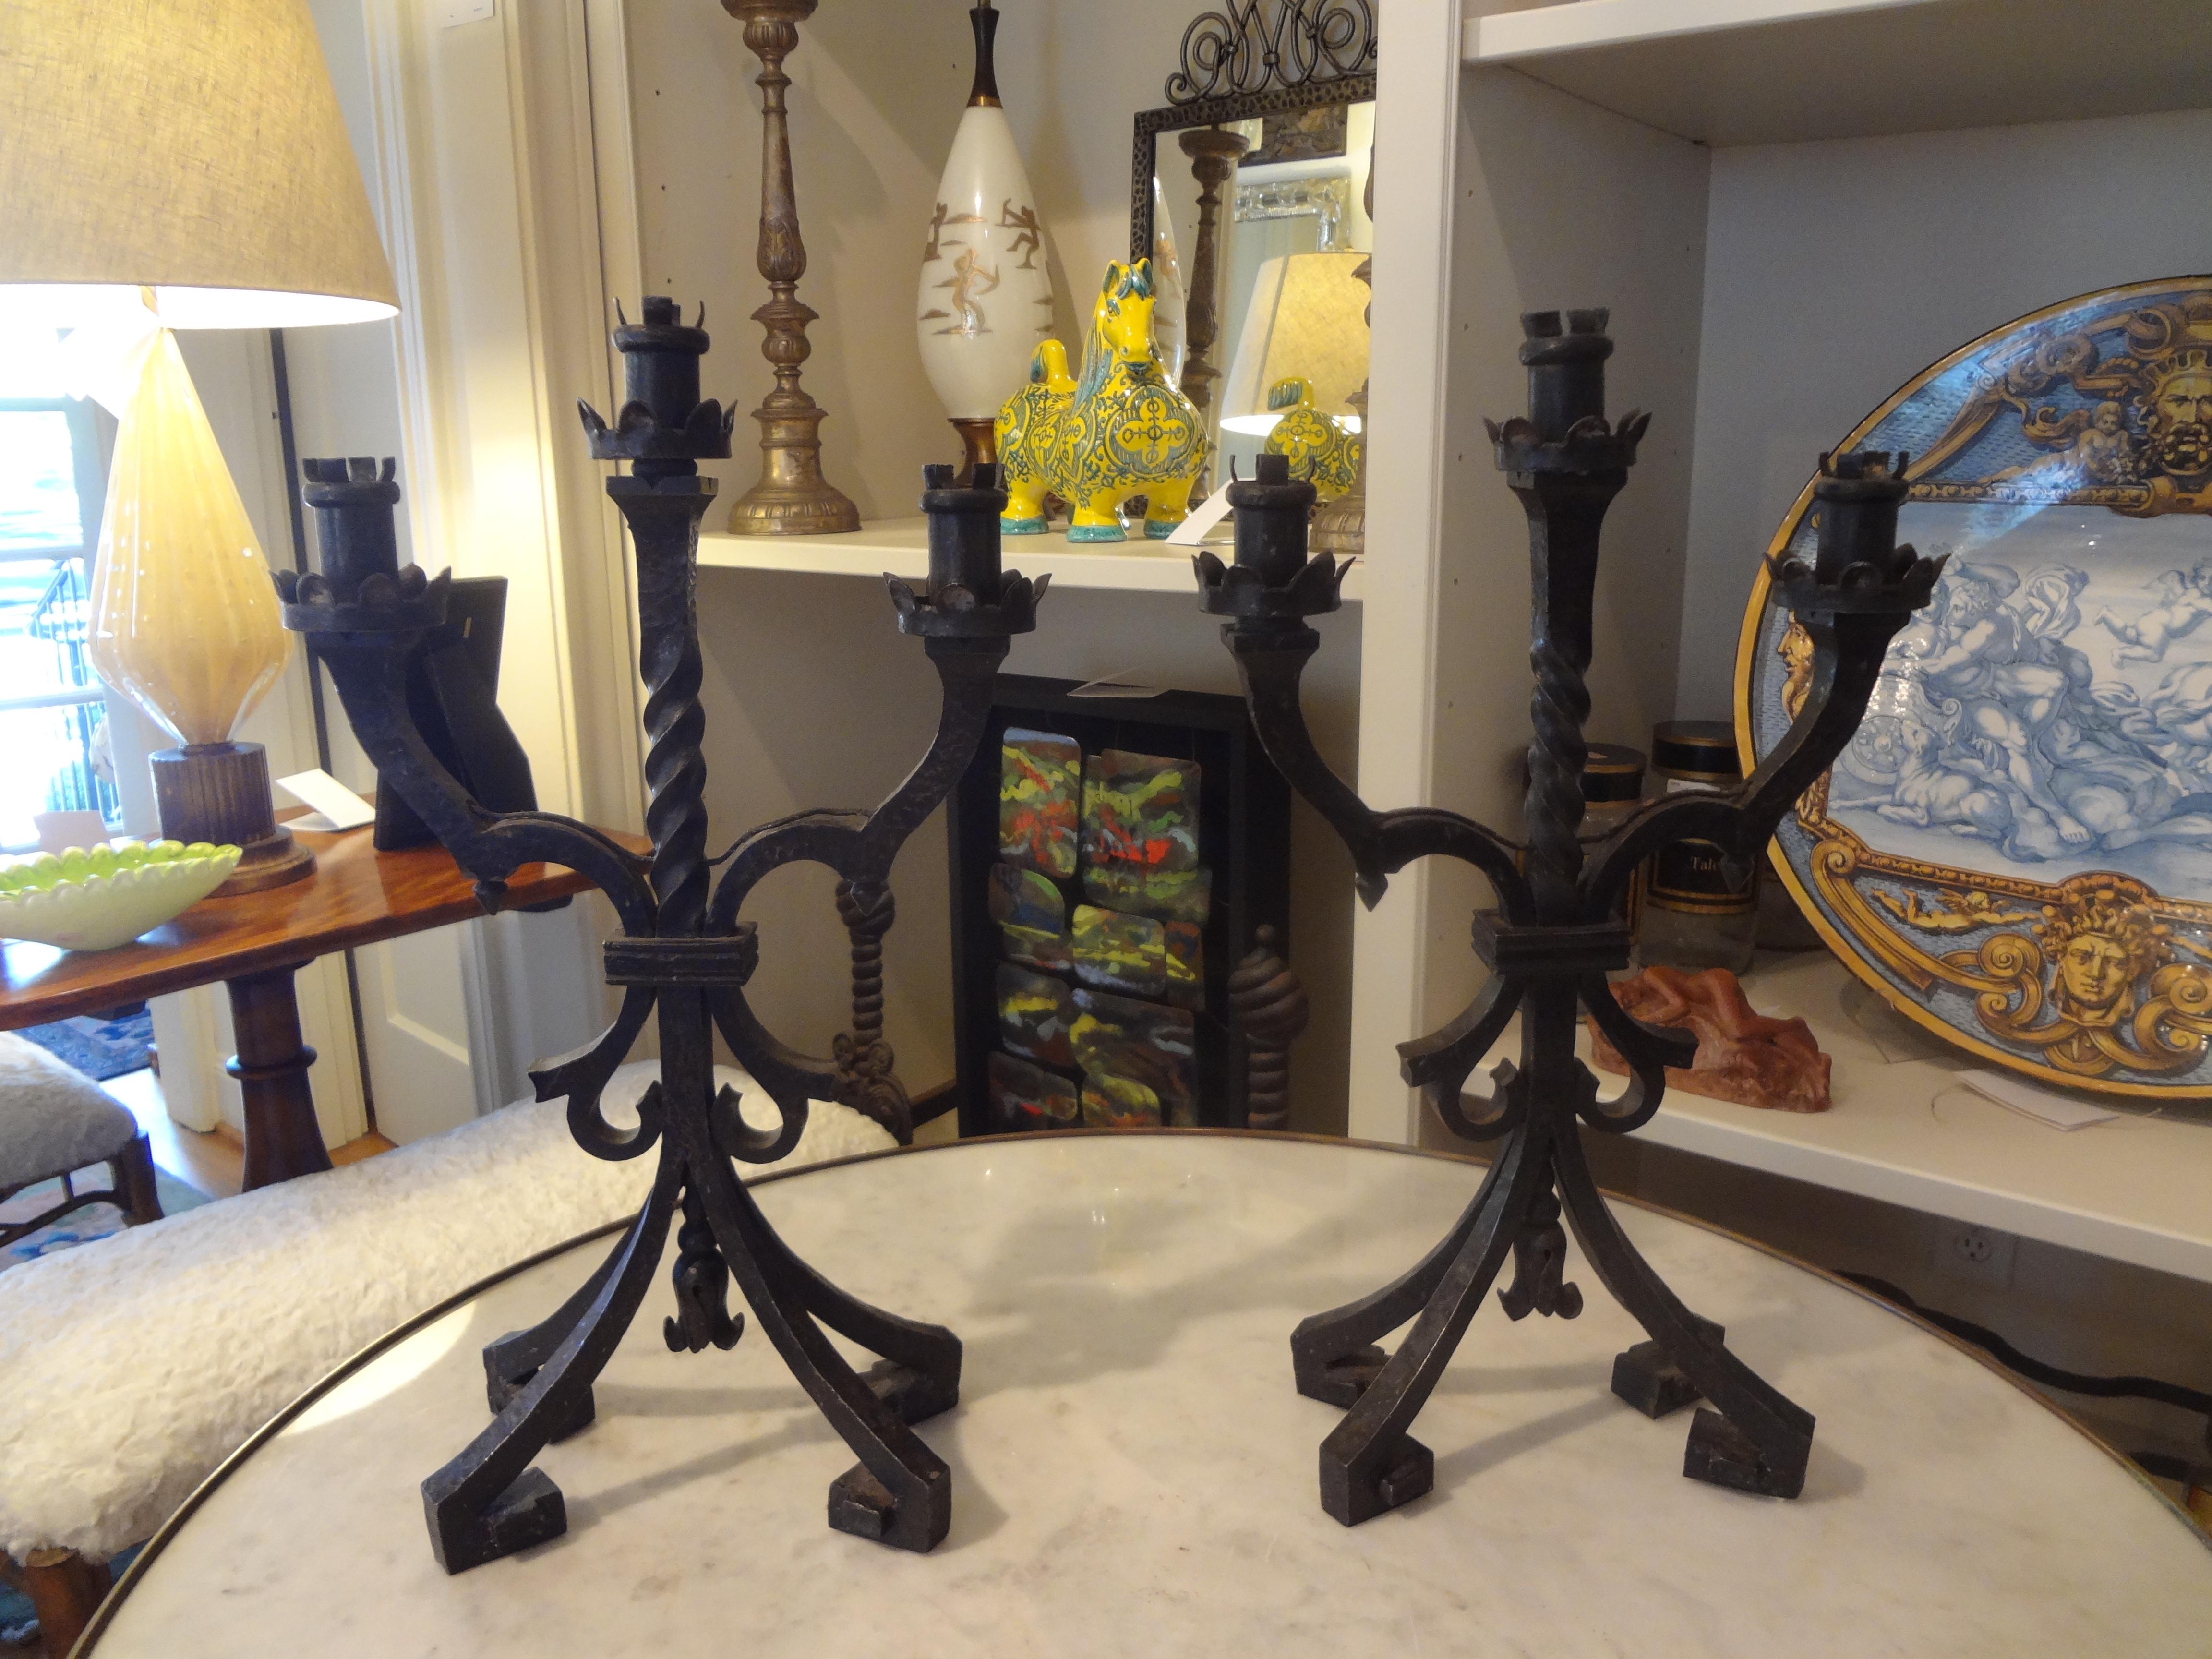 Pair of French Art Deco Iron Candleholders or Lamps Attributed to Charles Piguet.
Stunning pair of French Art Deco hand forged wrought iron candleholders or lamps with Greek key feet. This pair of lamps is attributed to Charles Piguet, circa 1925.